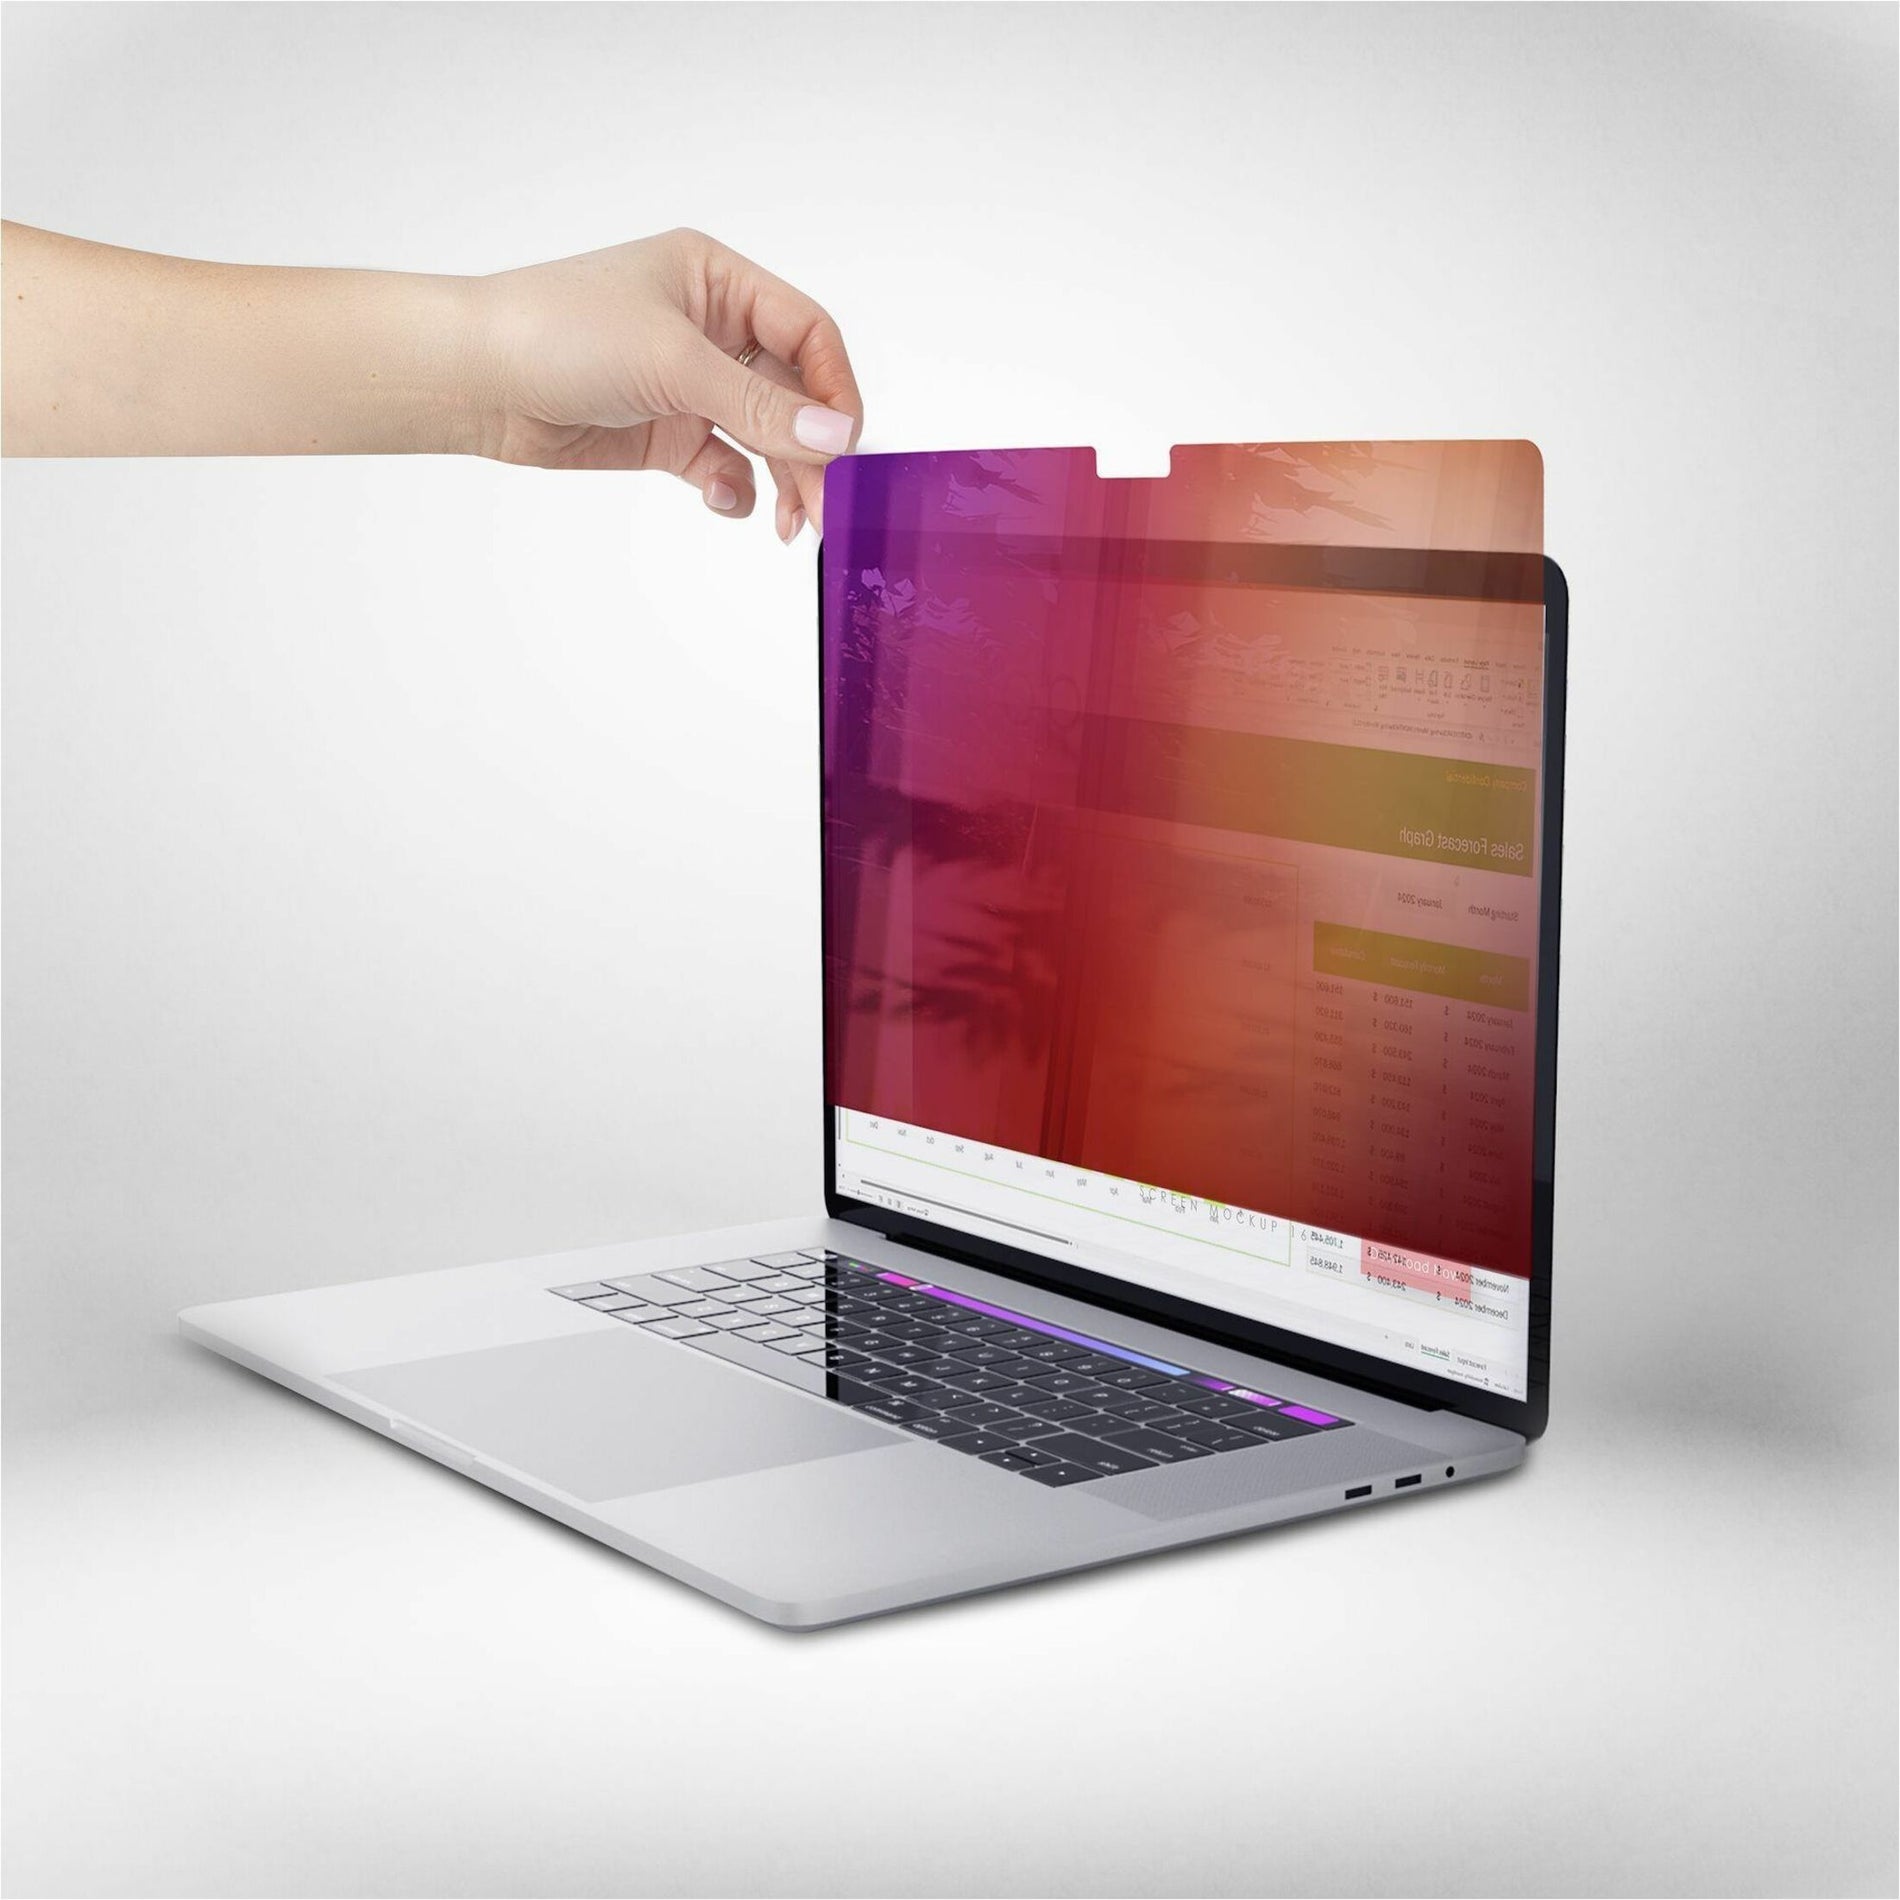 StarTech.com 162MG-PRIVACY-SCREEN Privacy Screen Filter, Limited Viewing Angle, Double Sided, Reversible Matte-to-Glossy, Residue-free, Anti-reflective, Anti-glare, 16" Display Size Supported